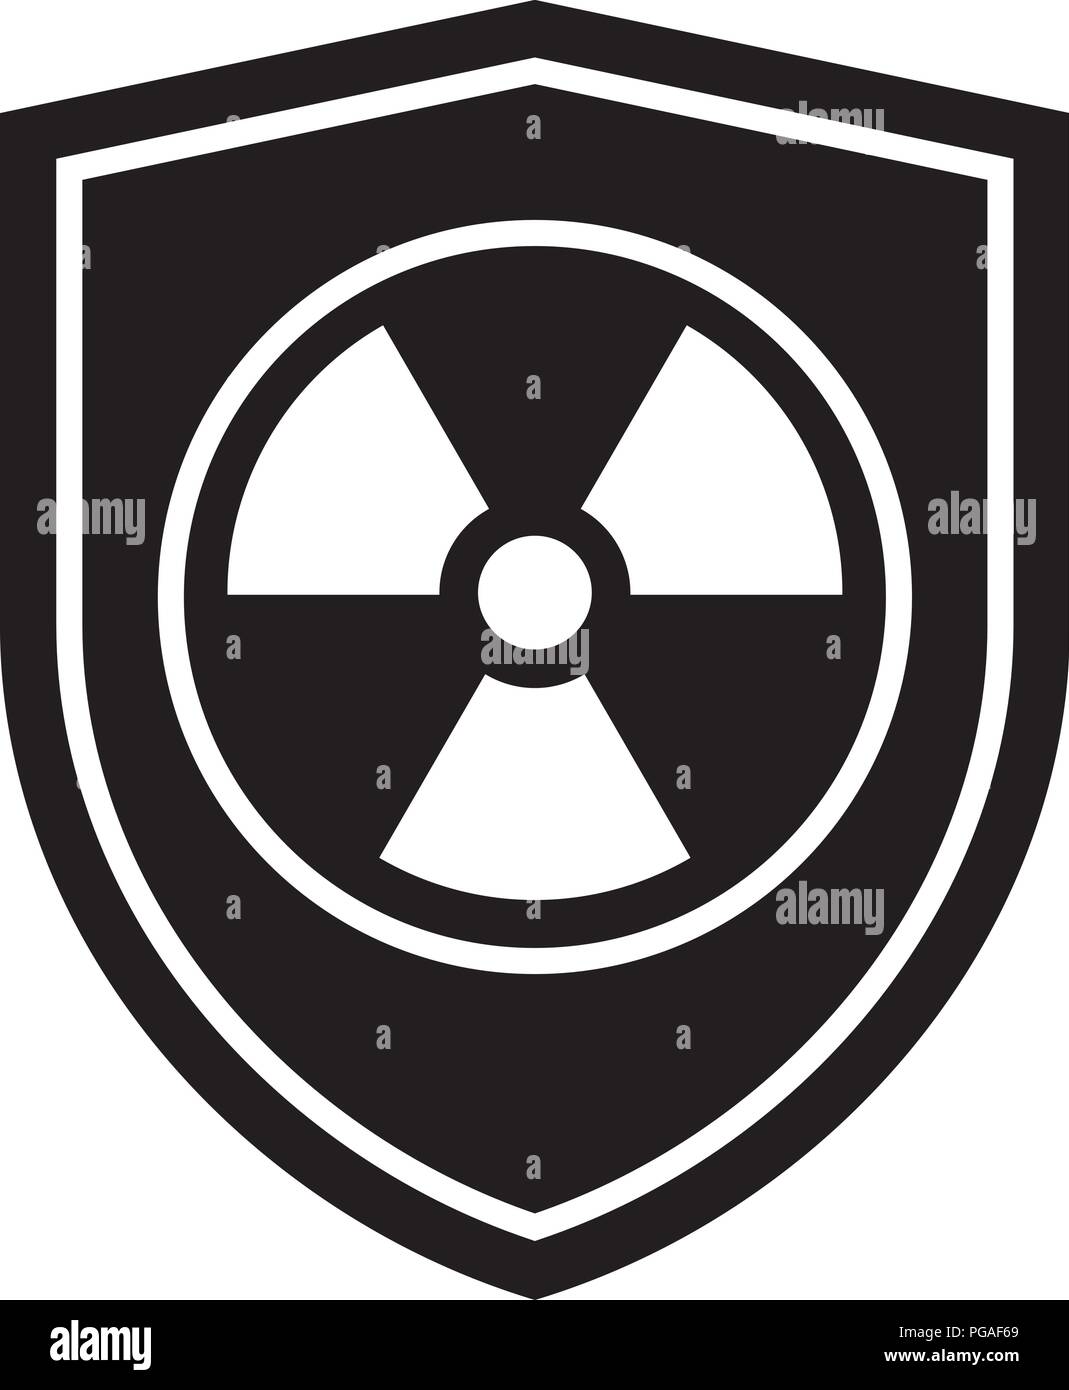 Icon of Radiation shield. Defense, protection or safety symbol, sign Stock Vector